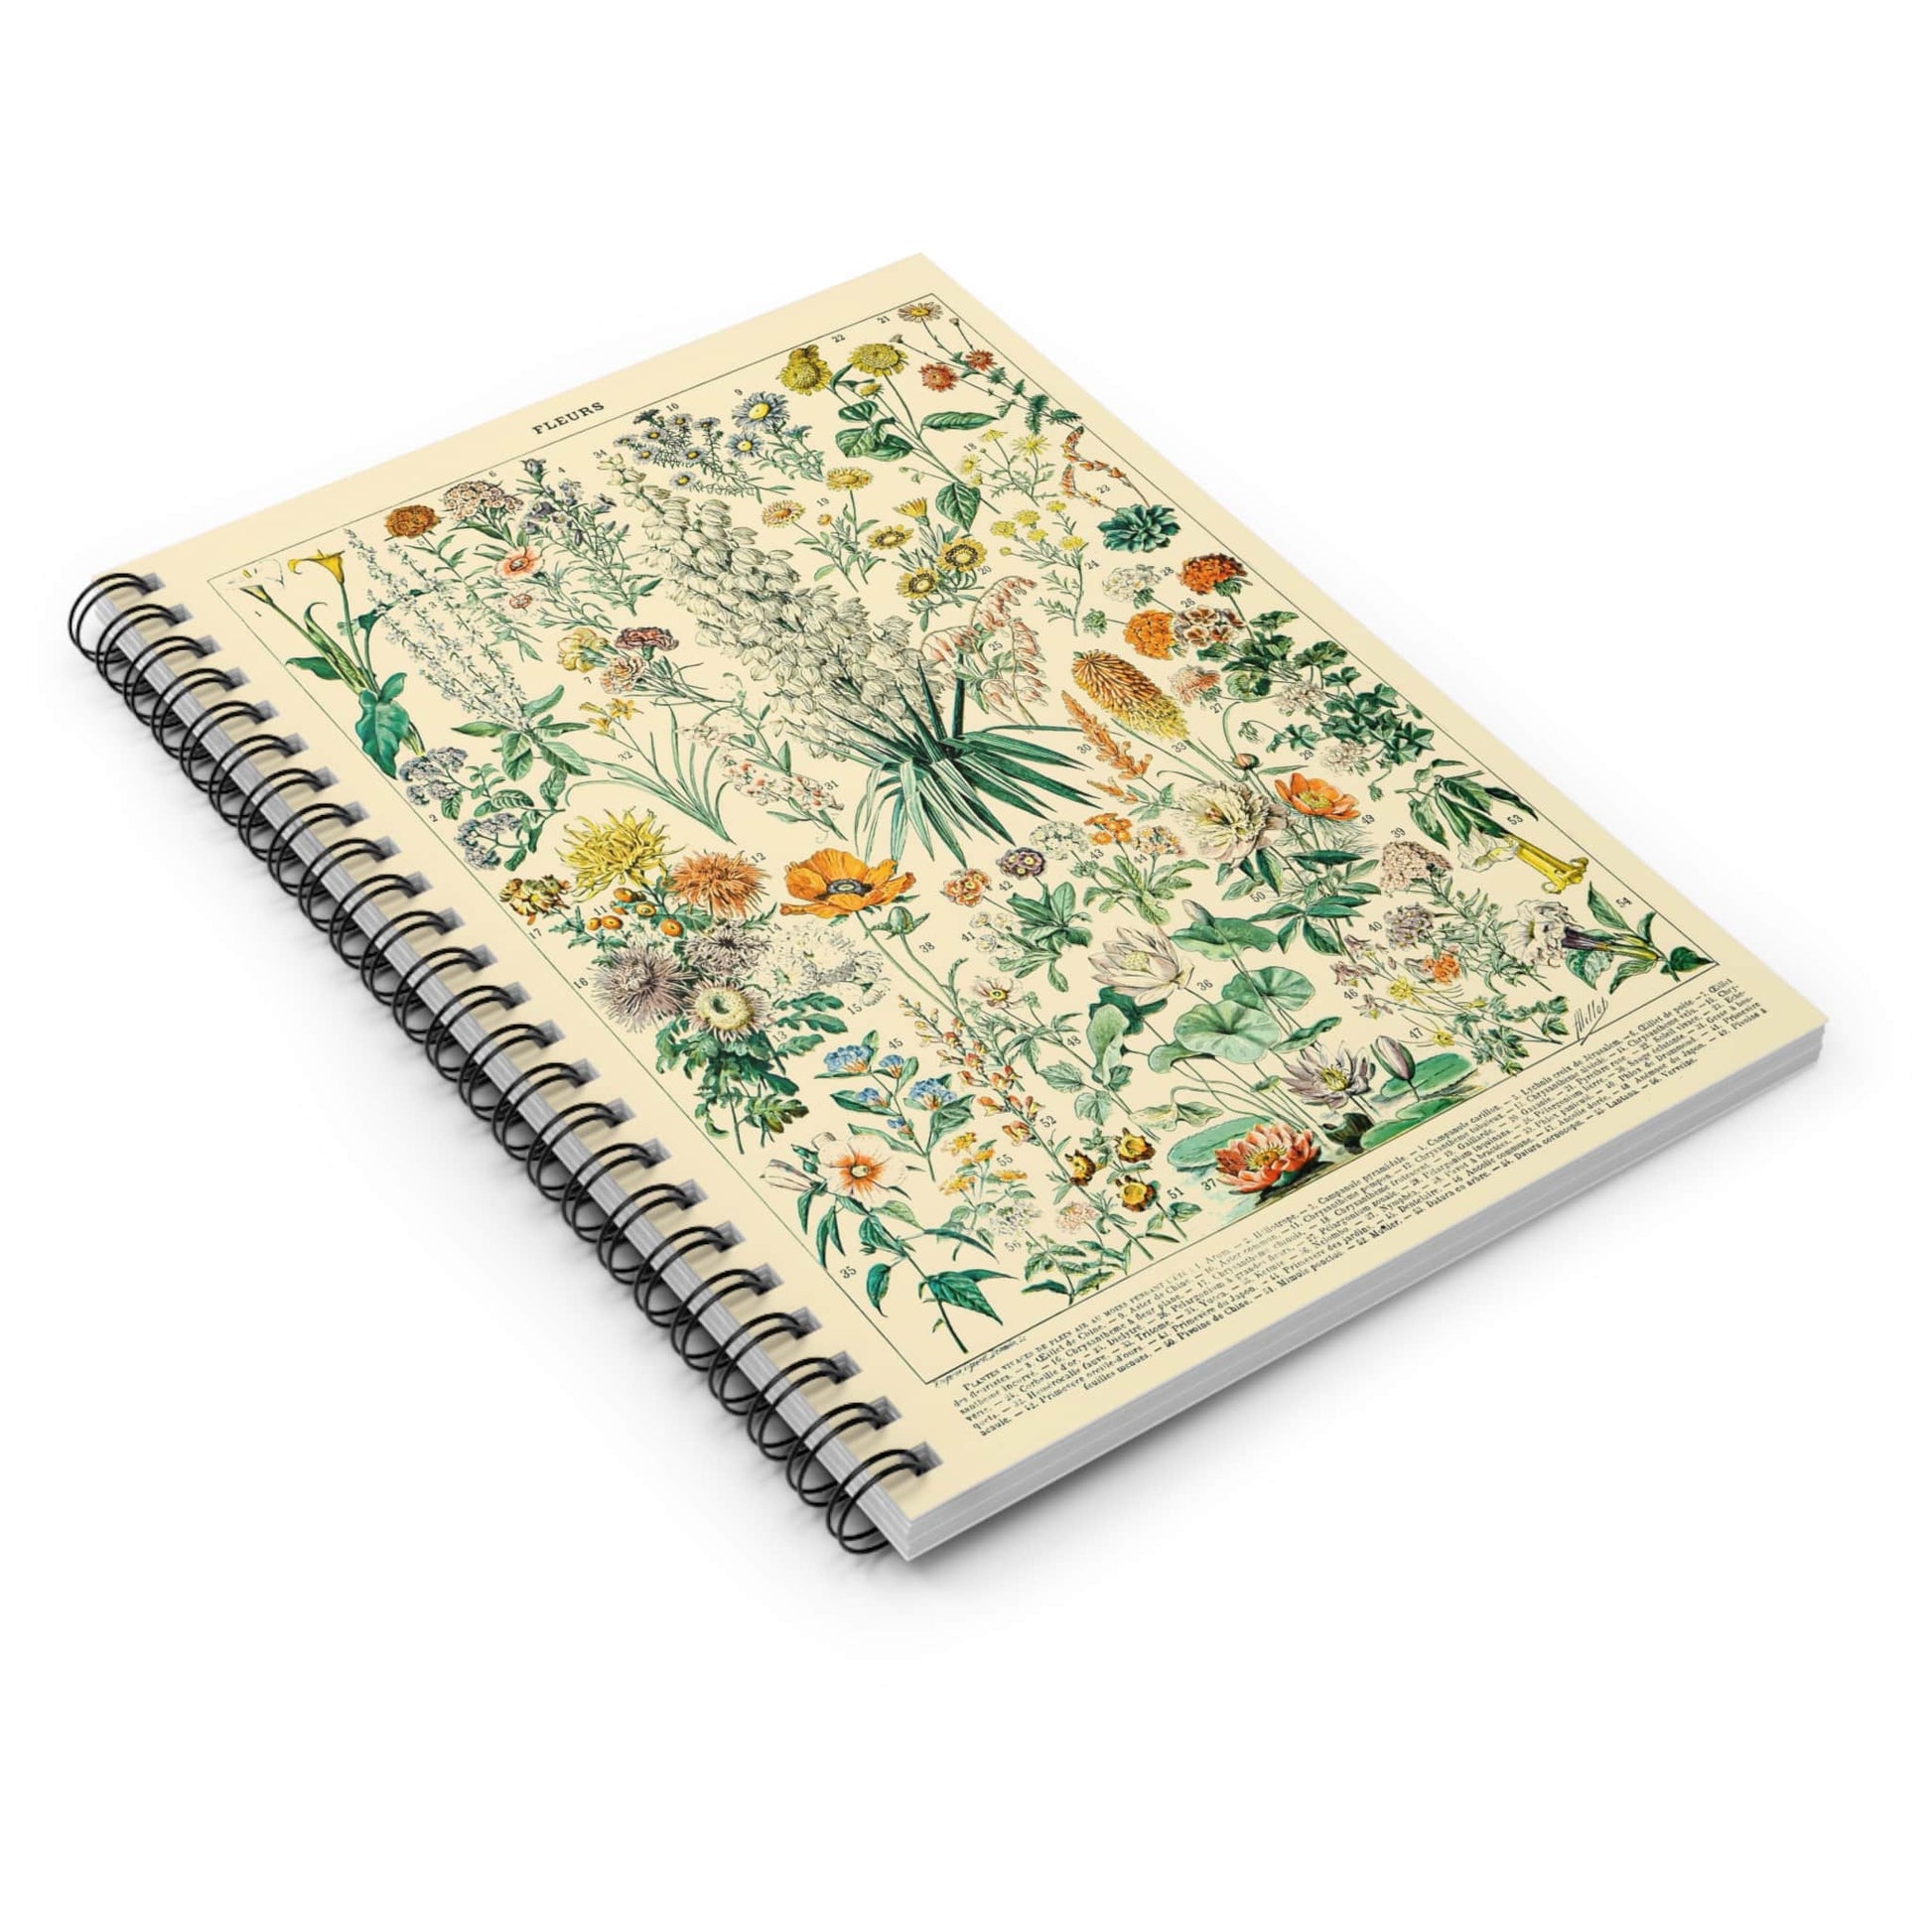 Wildflower Diagram Spiral Notebook Laying Flat on White Surface